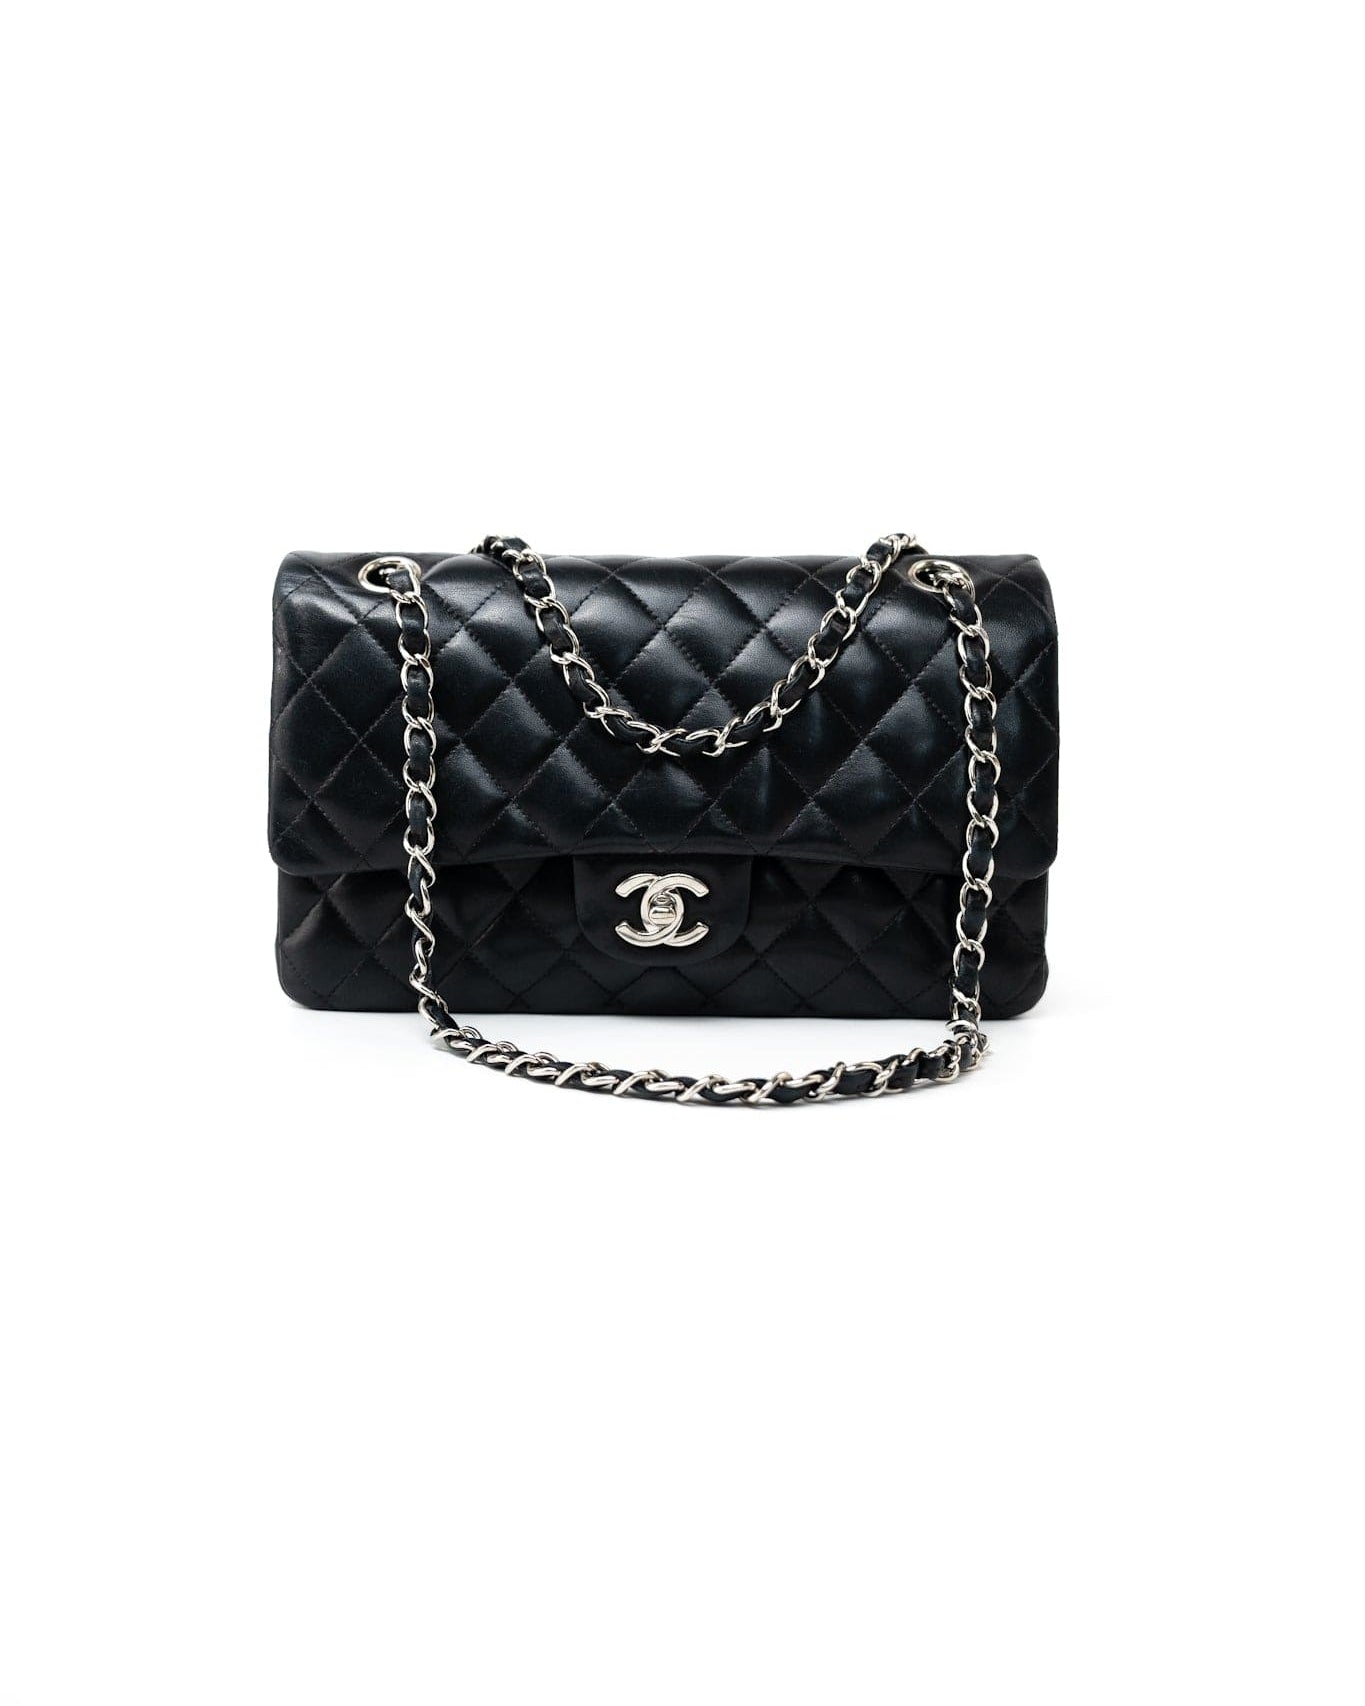 CHANEL Handbag Vintage Black Lambskin Quilted Classic Flap Medium Silver Hardware - Redeluxe